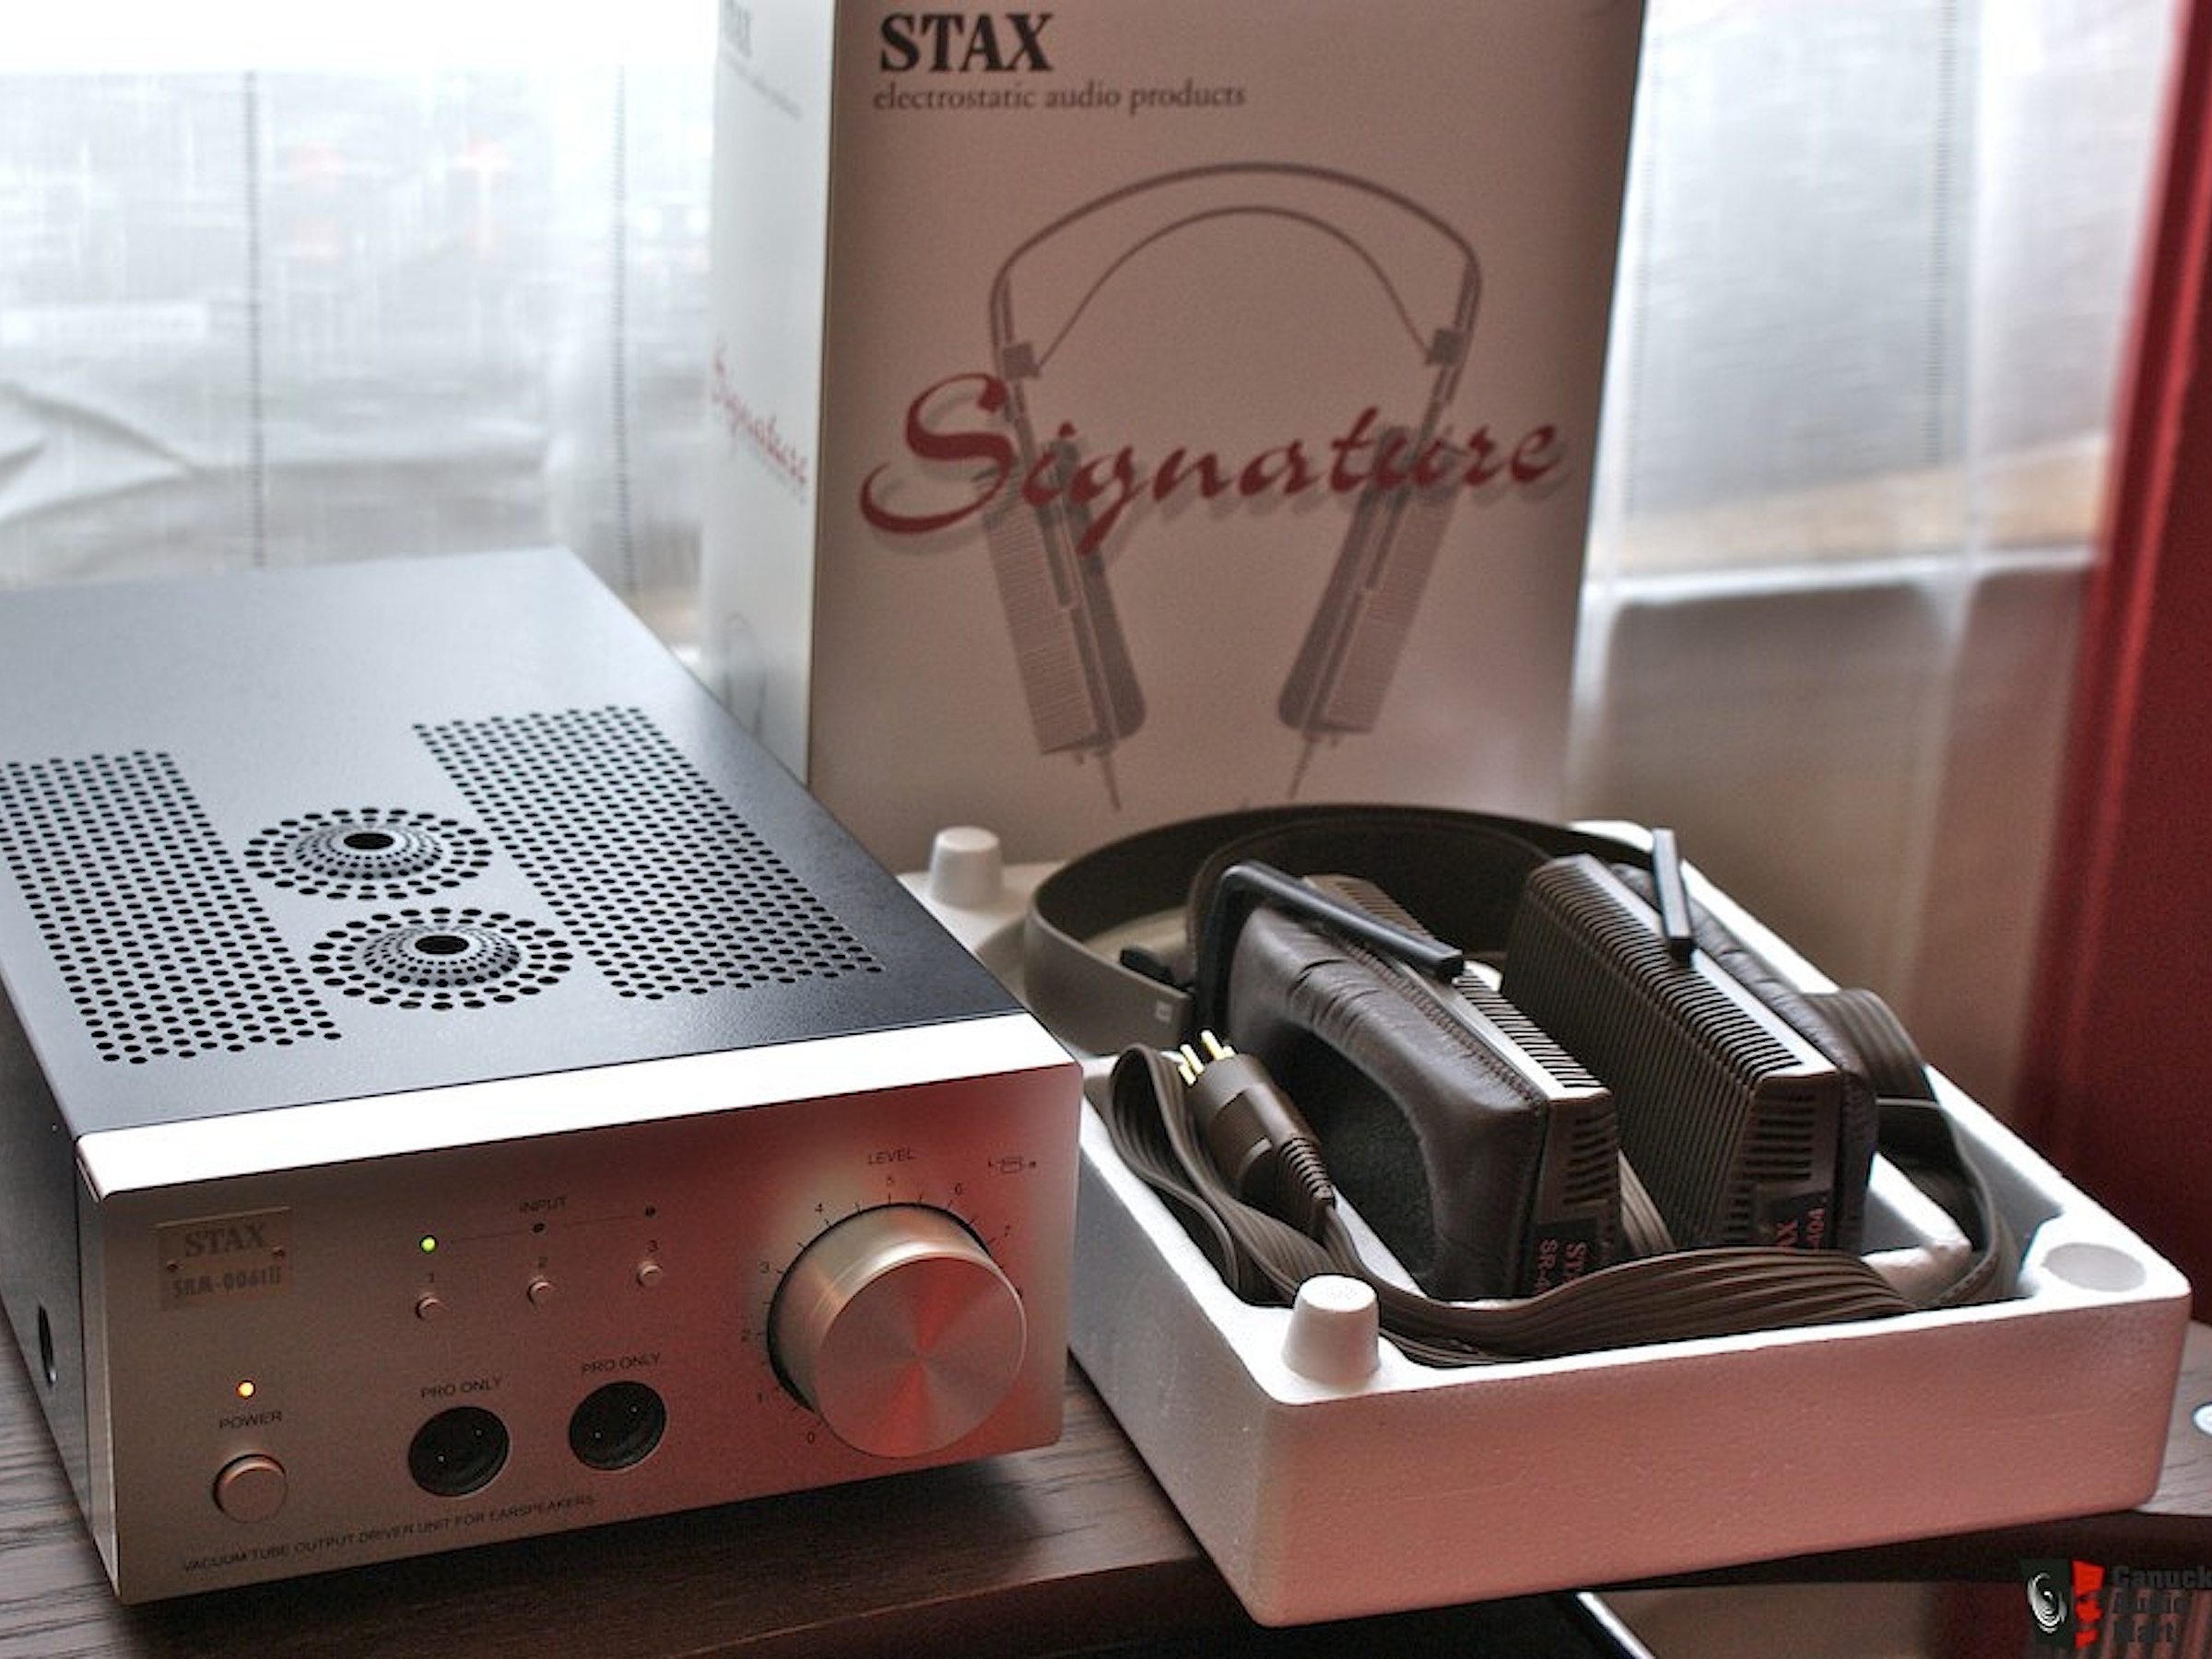 STAX SRS-4040 Signature | zStereo